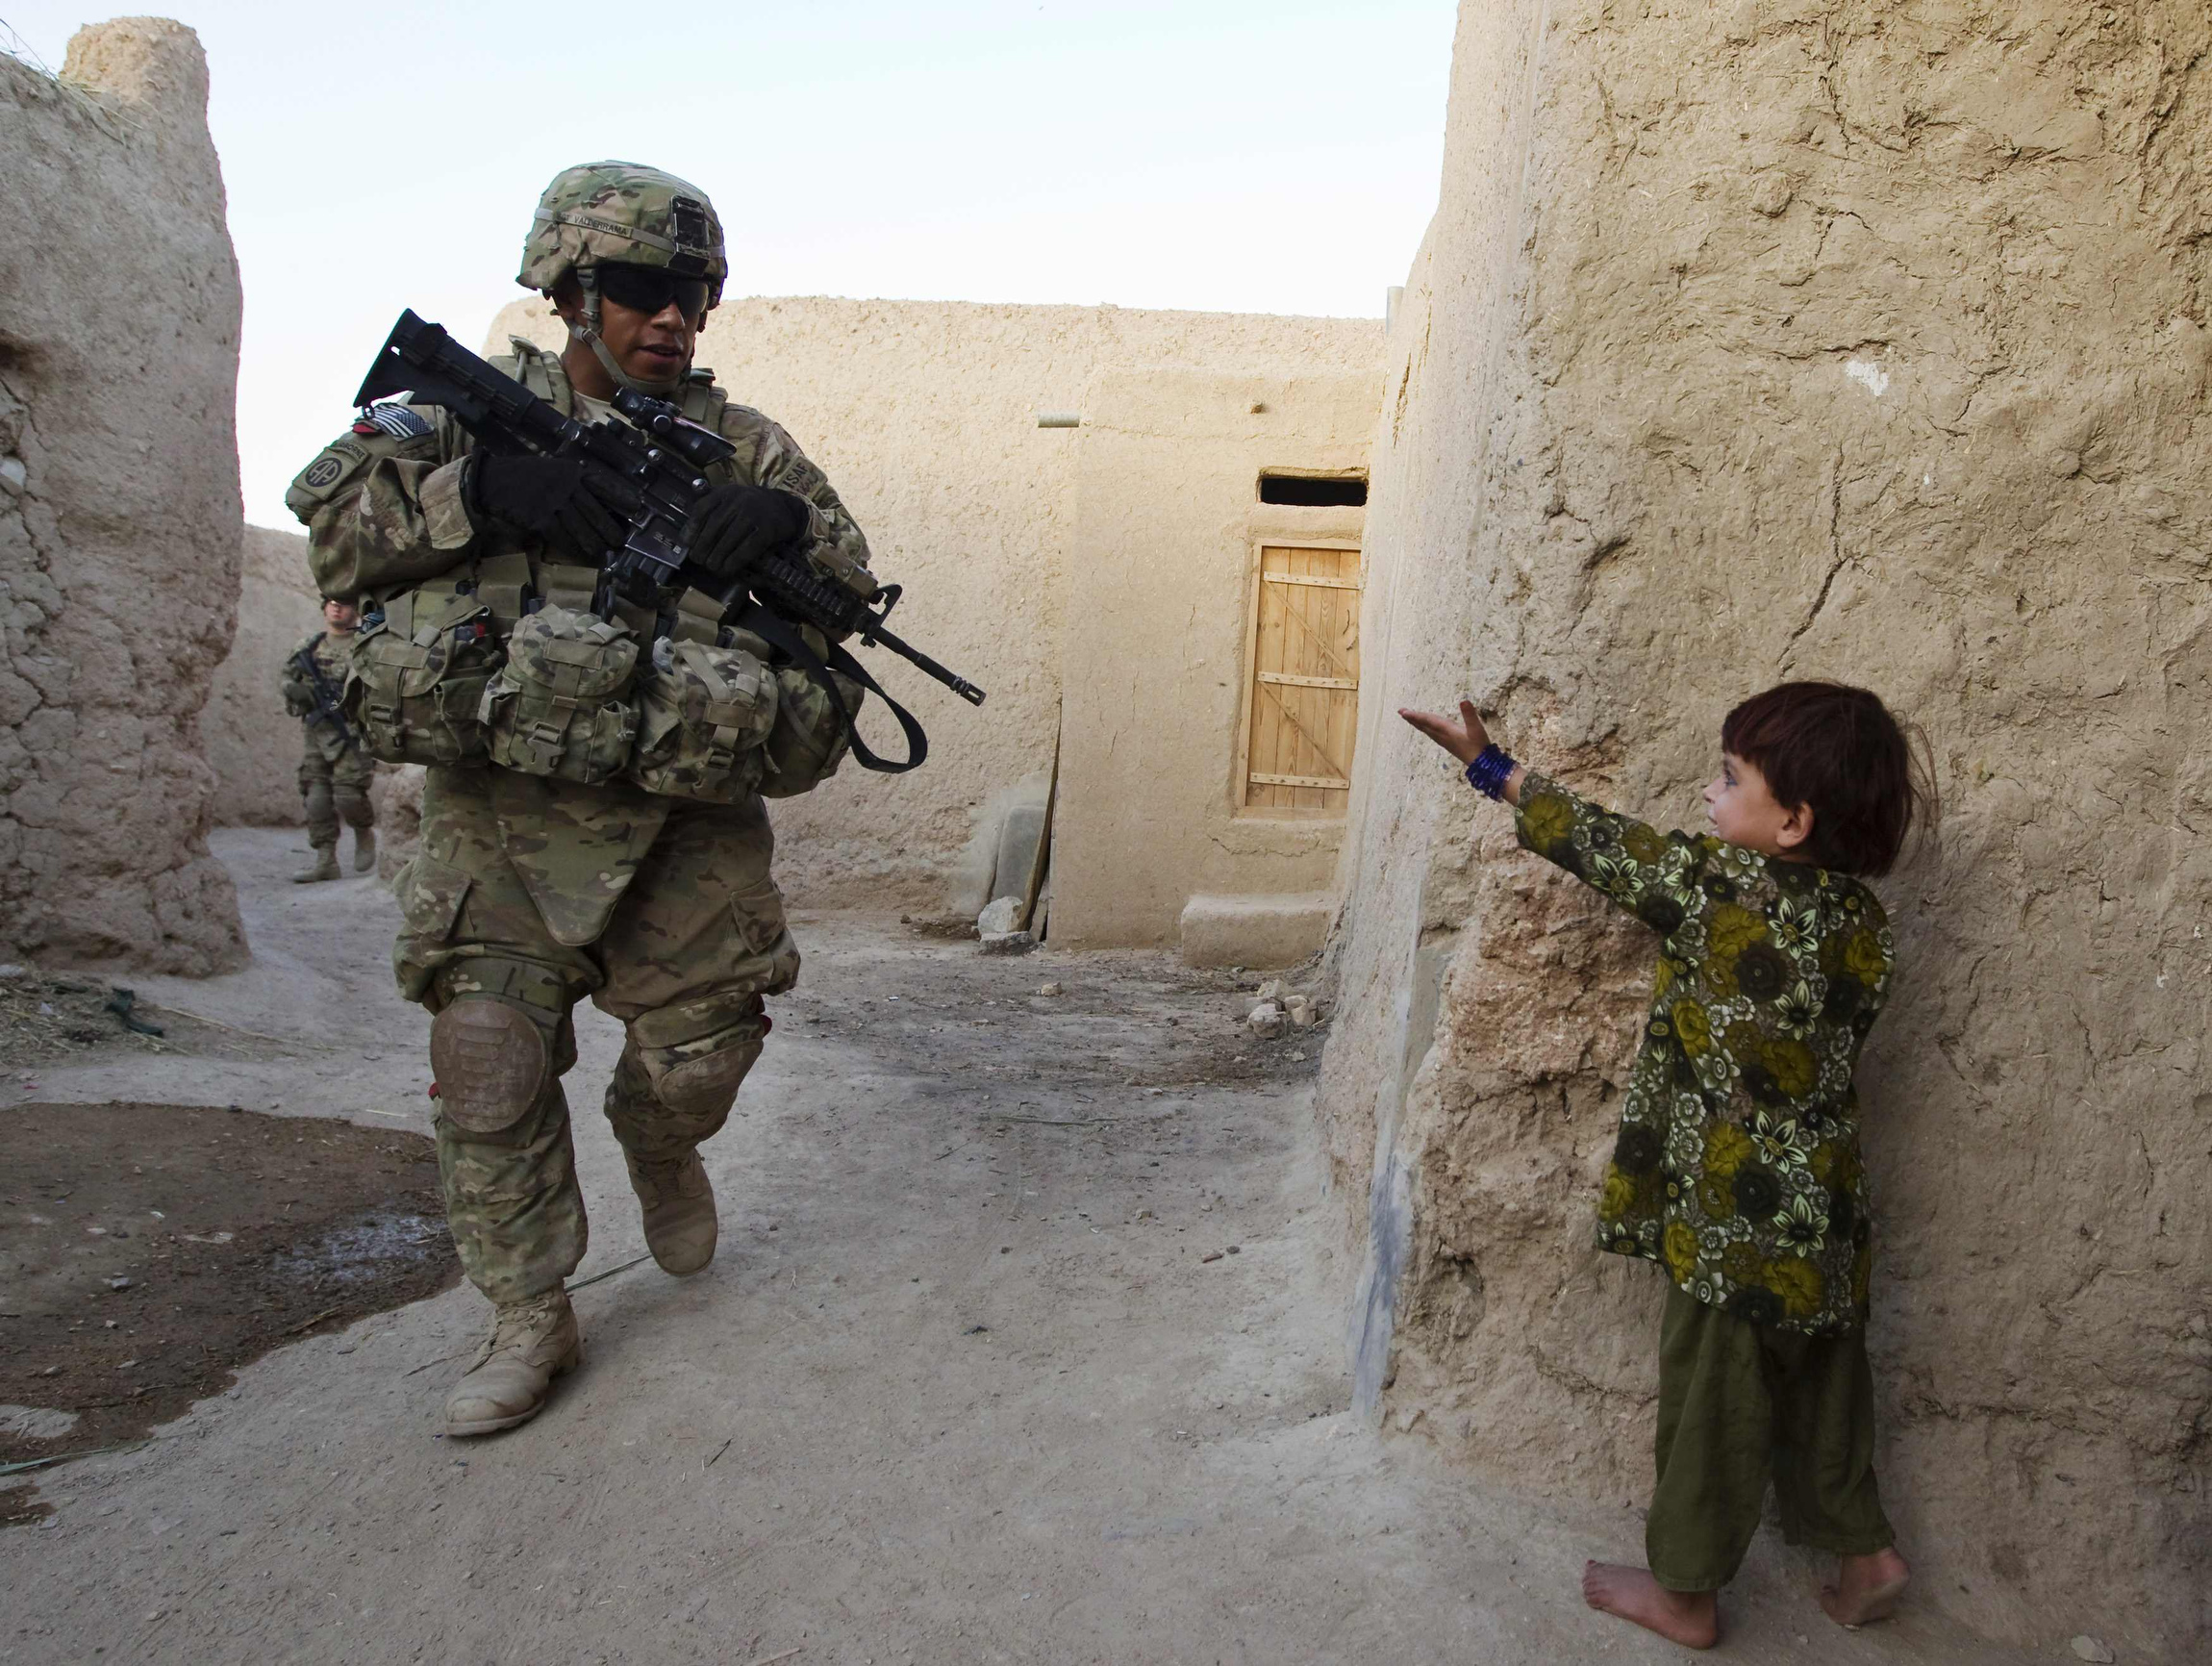 A girl gestures to a U.S. soldier on patrol in the town of Senjaray in the Kandahar province of southern Afghanistan June 1. Some 68,000 U.S. troops remain in Afghanistan as part of Operation Enduring Freedom. (CNS photo/Shamil Zhumatov, Reuters) (Sept. 28, 2012)